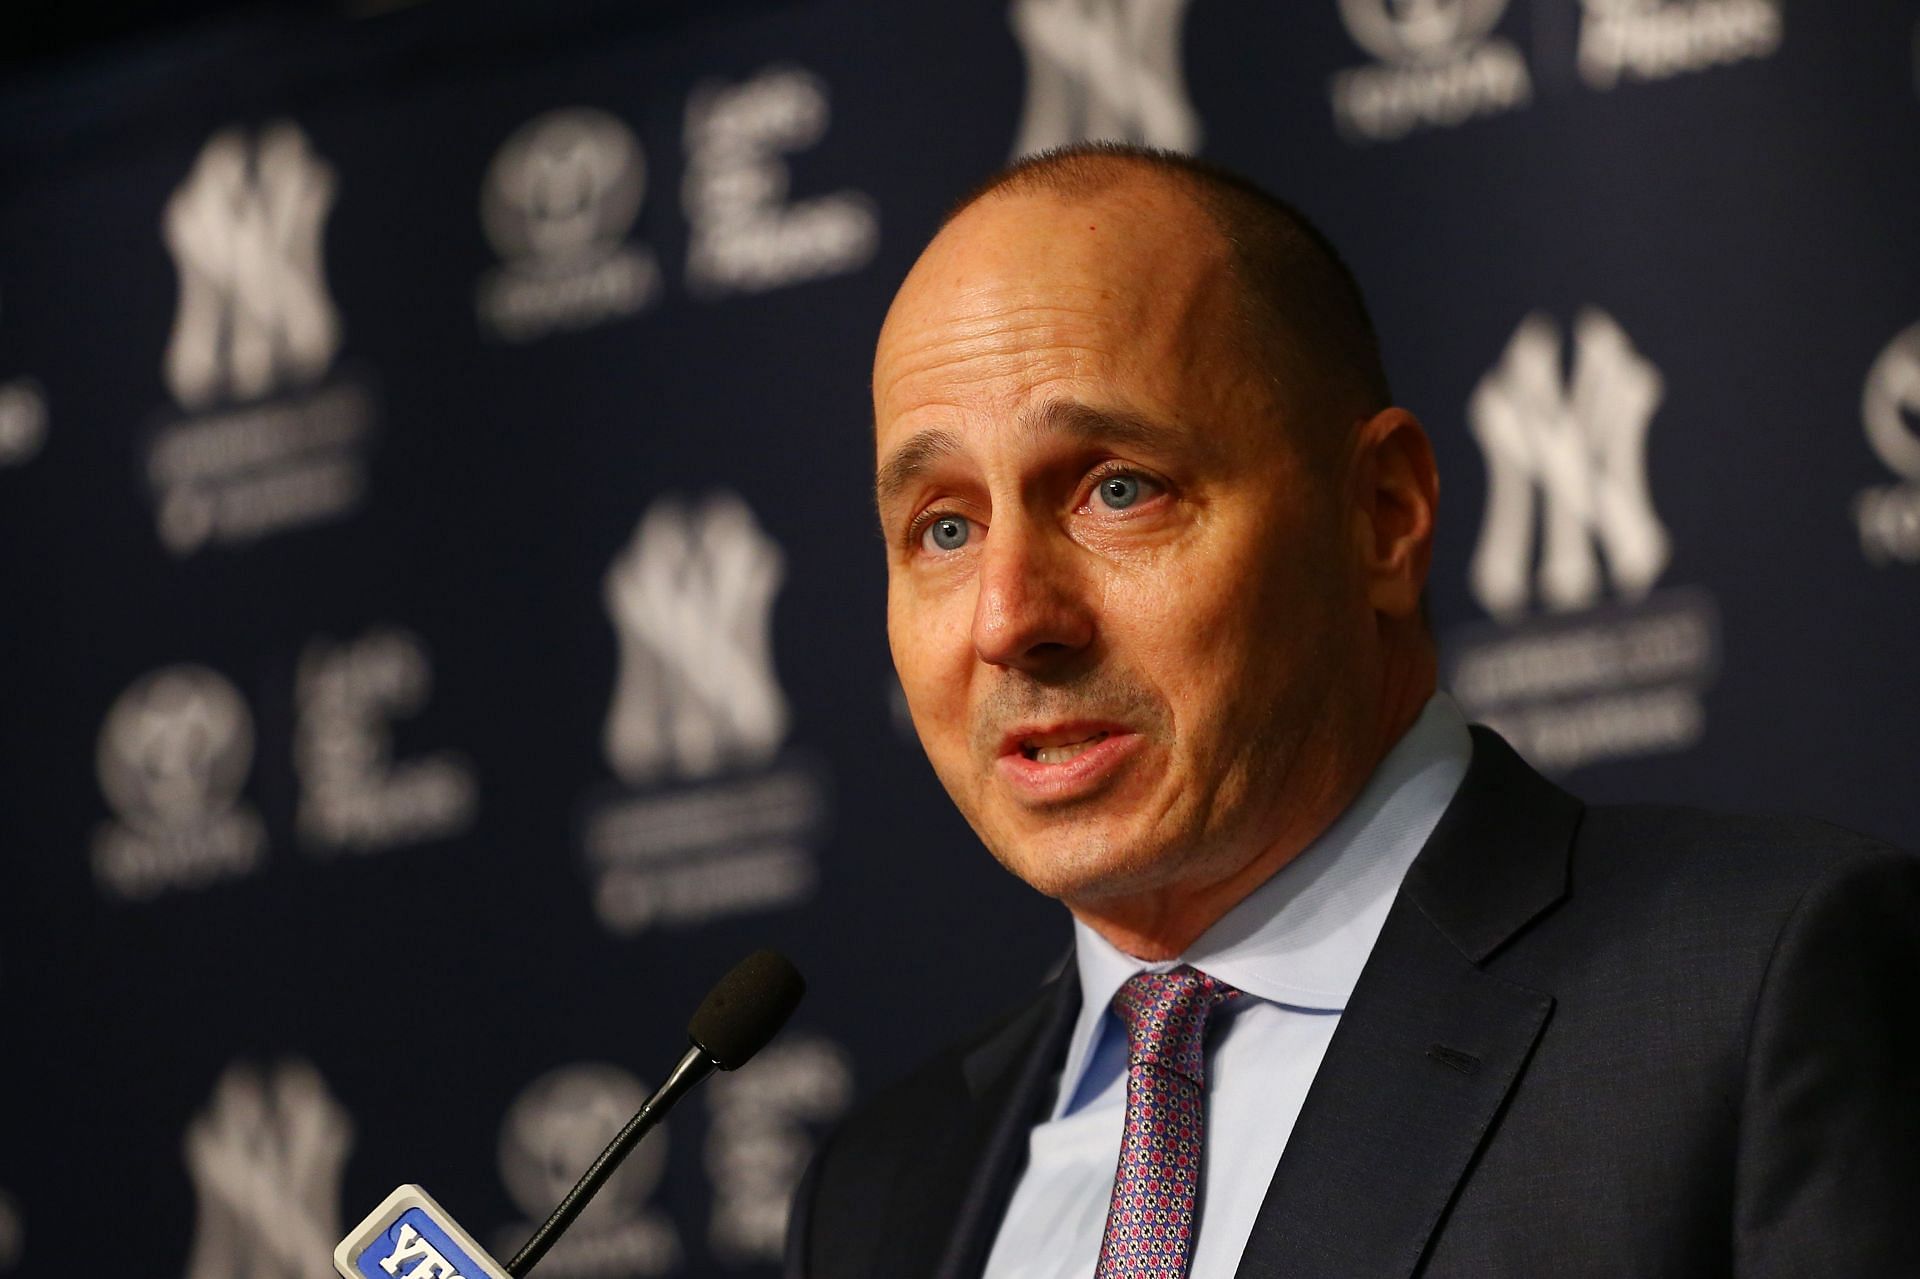 Brian Cashman speaks to the media prior to introducing Aaron Boone as New York Yankee manager.